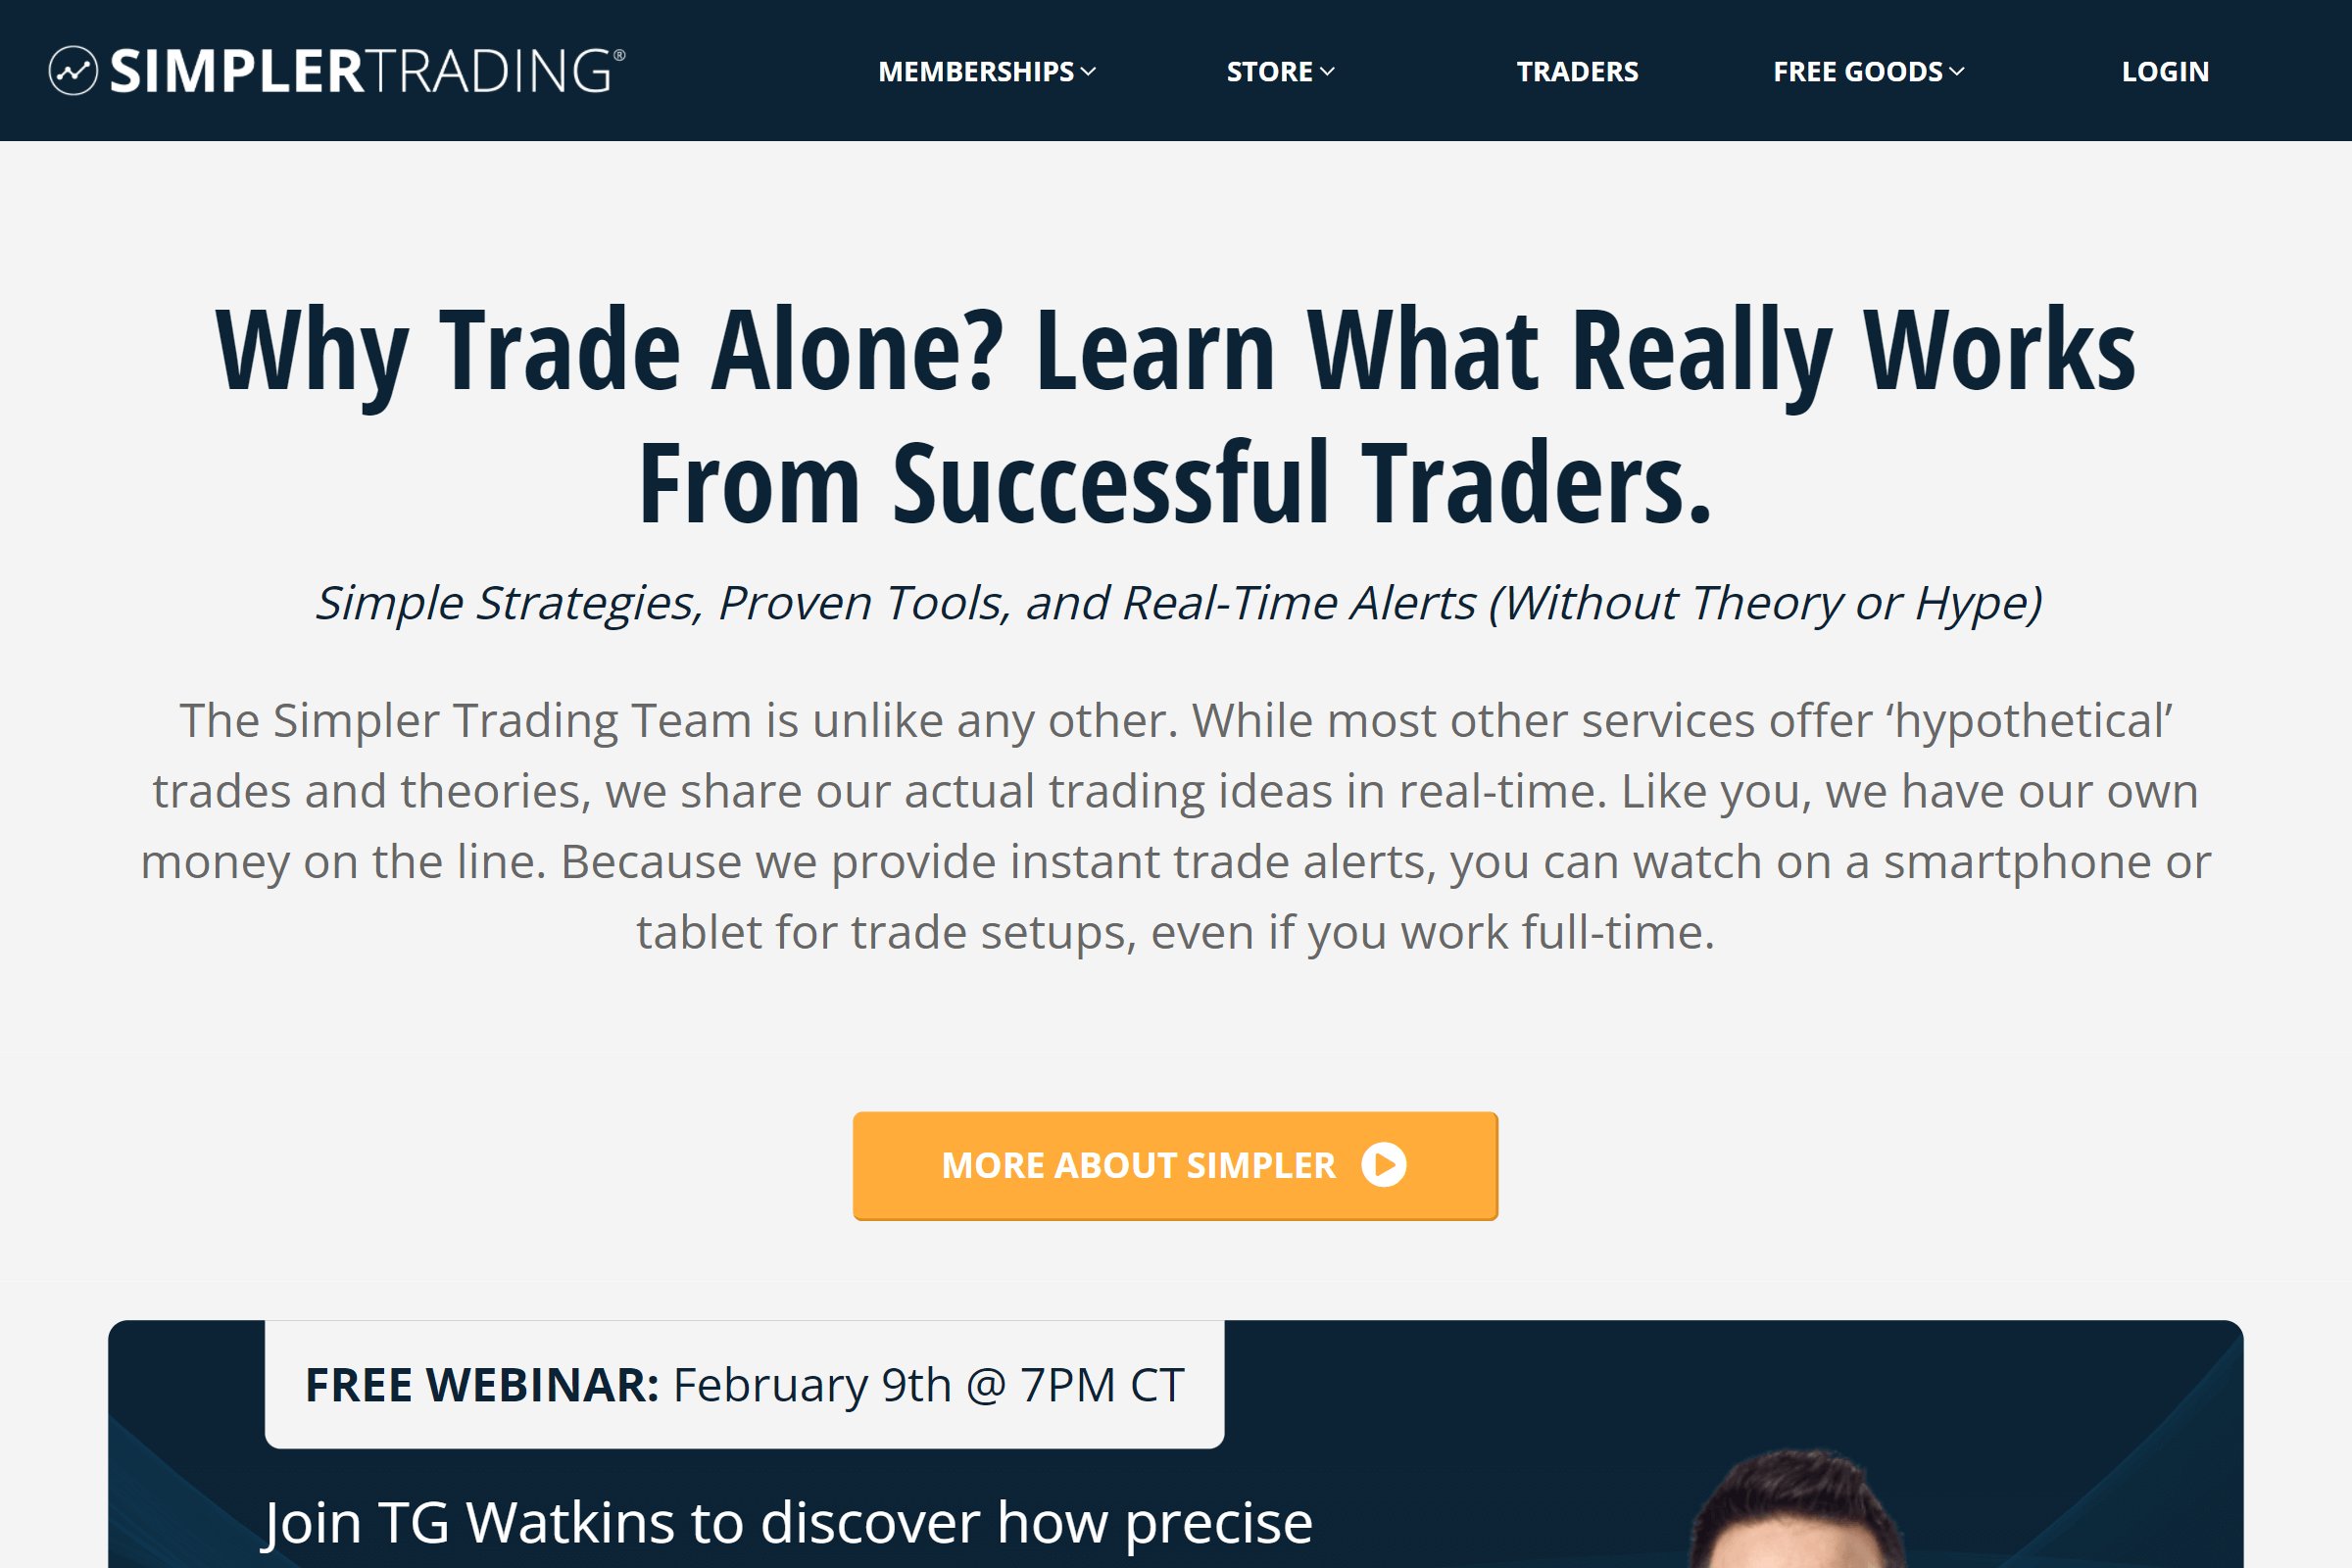 Learn to Trade Online on ReadSomeReviews